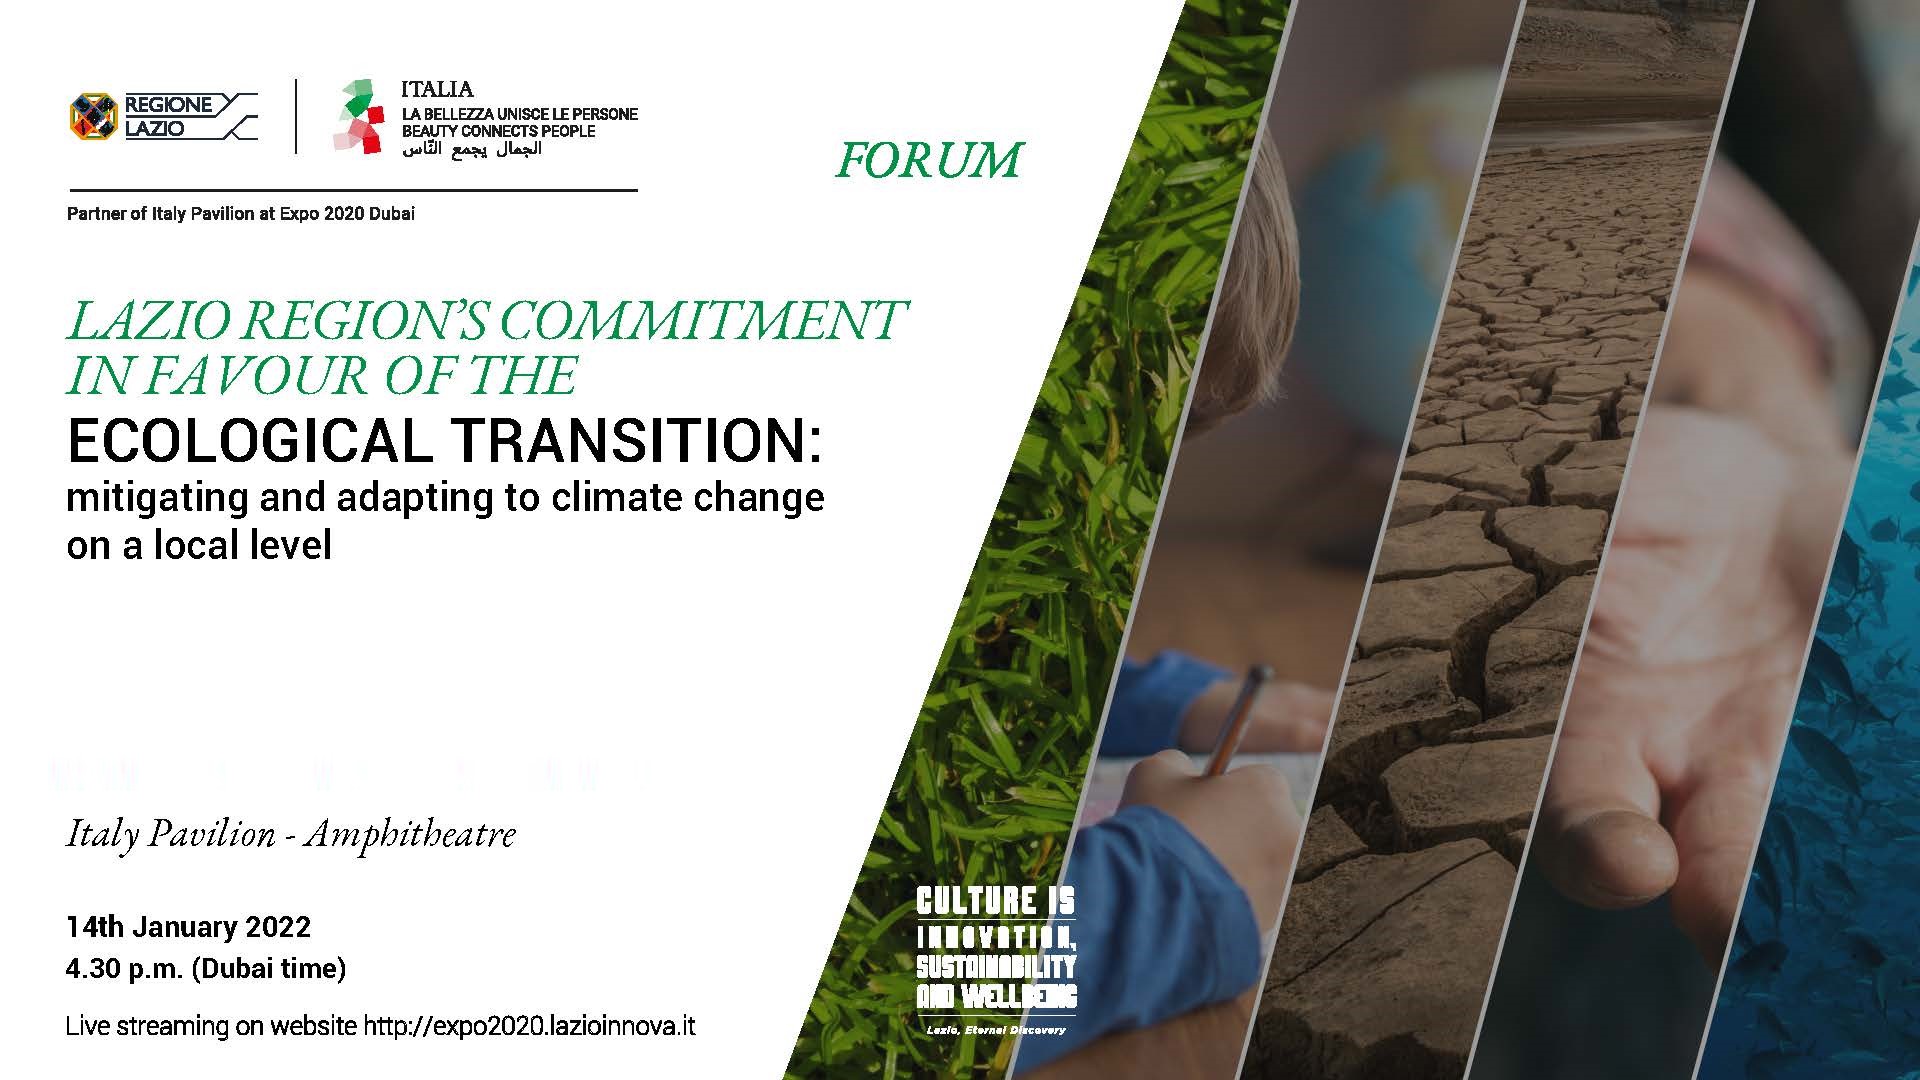 Forum – “Lazio Region’s commitment to ecological transition: mitigation and adaptation for climate change on a local scale”